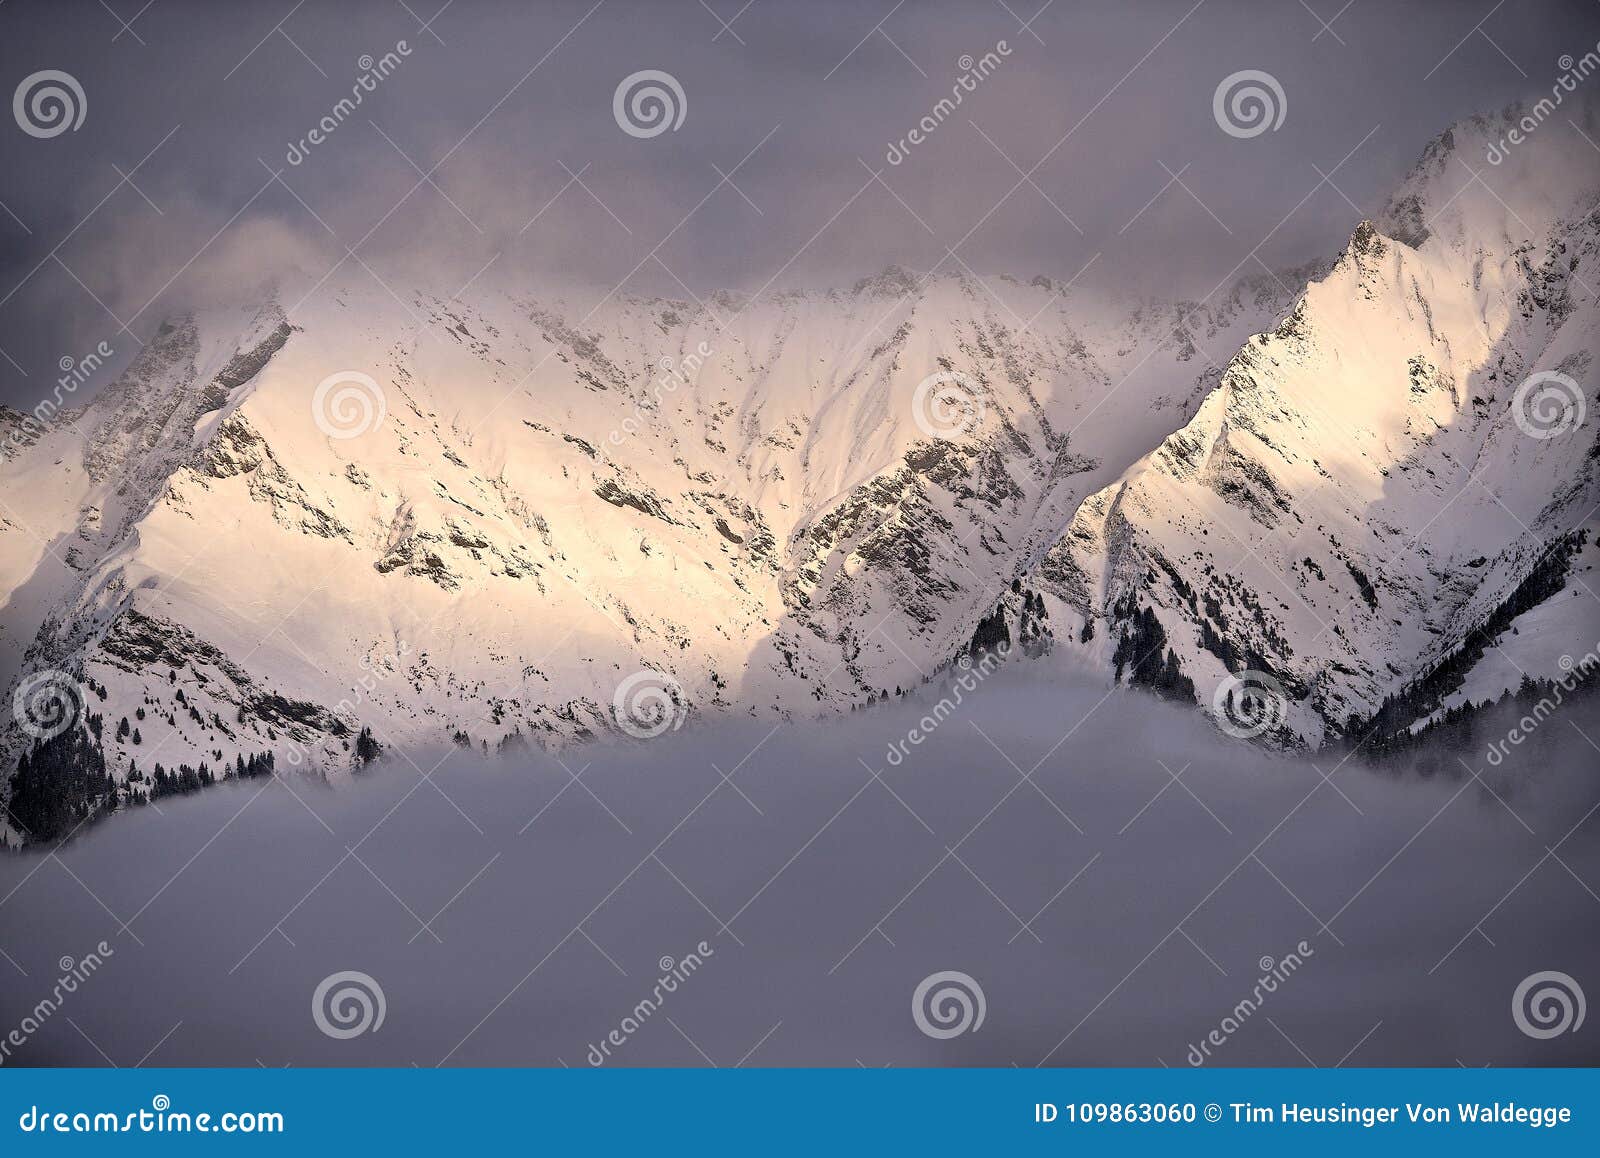 snow-covered mountain peaks in graubÃÂ¼nden, swiss alps